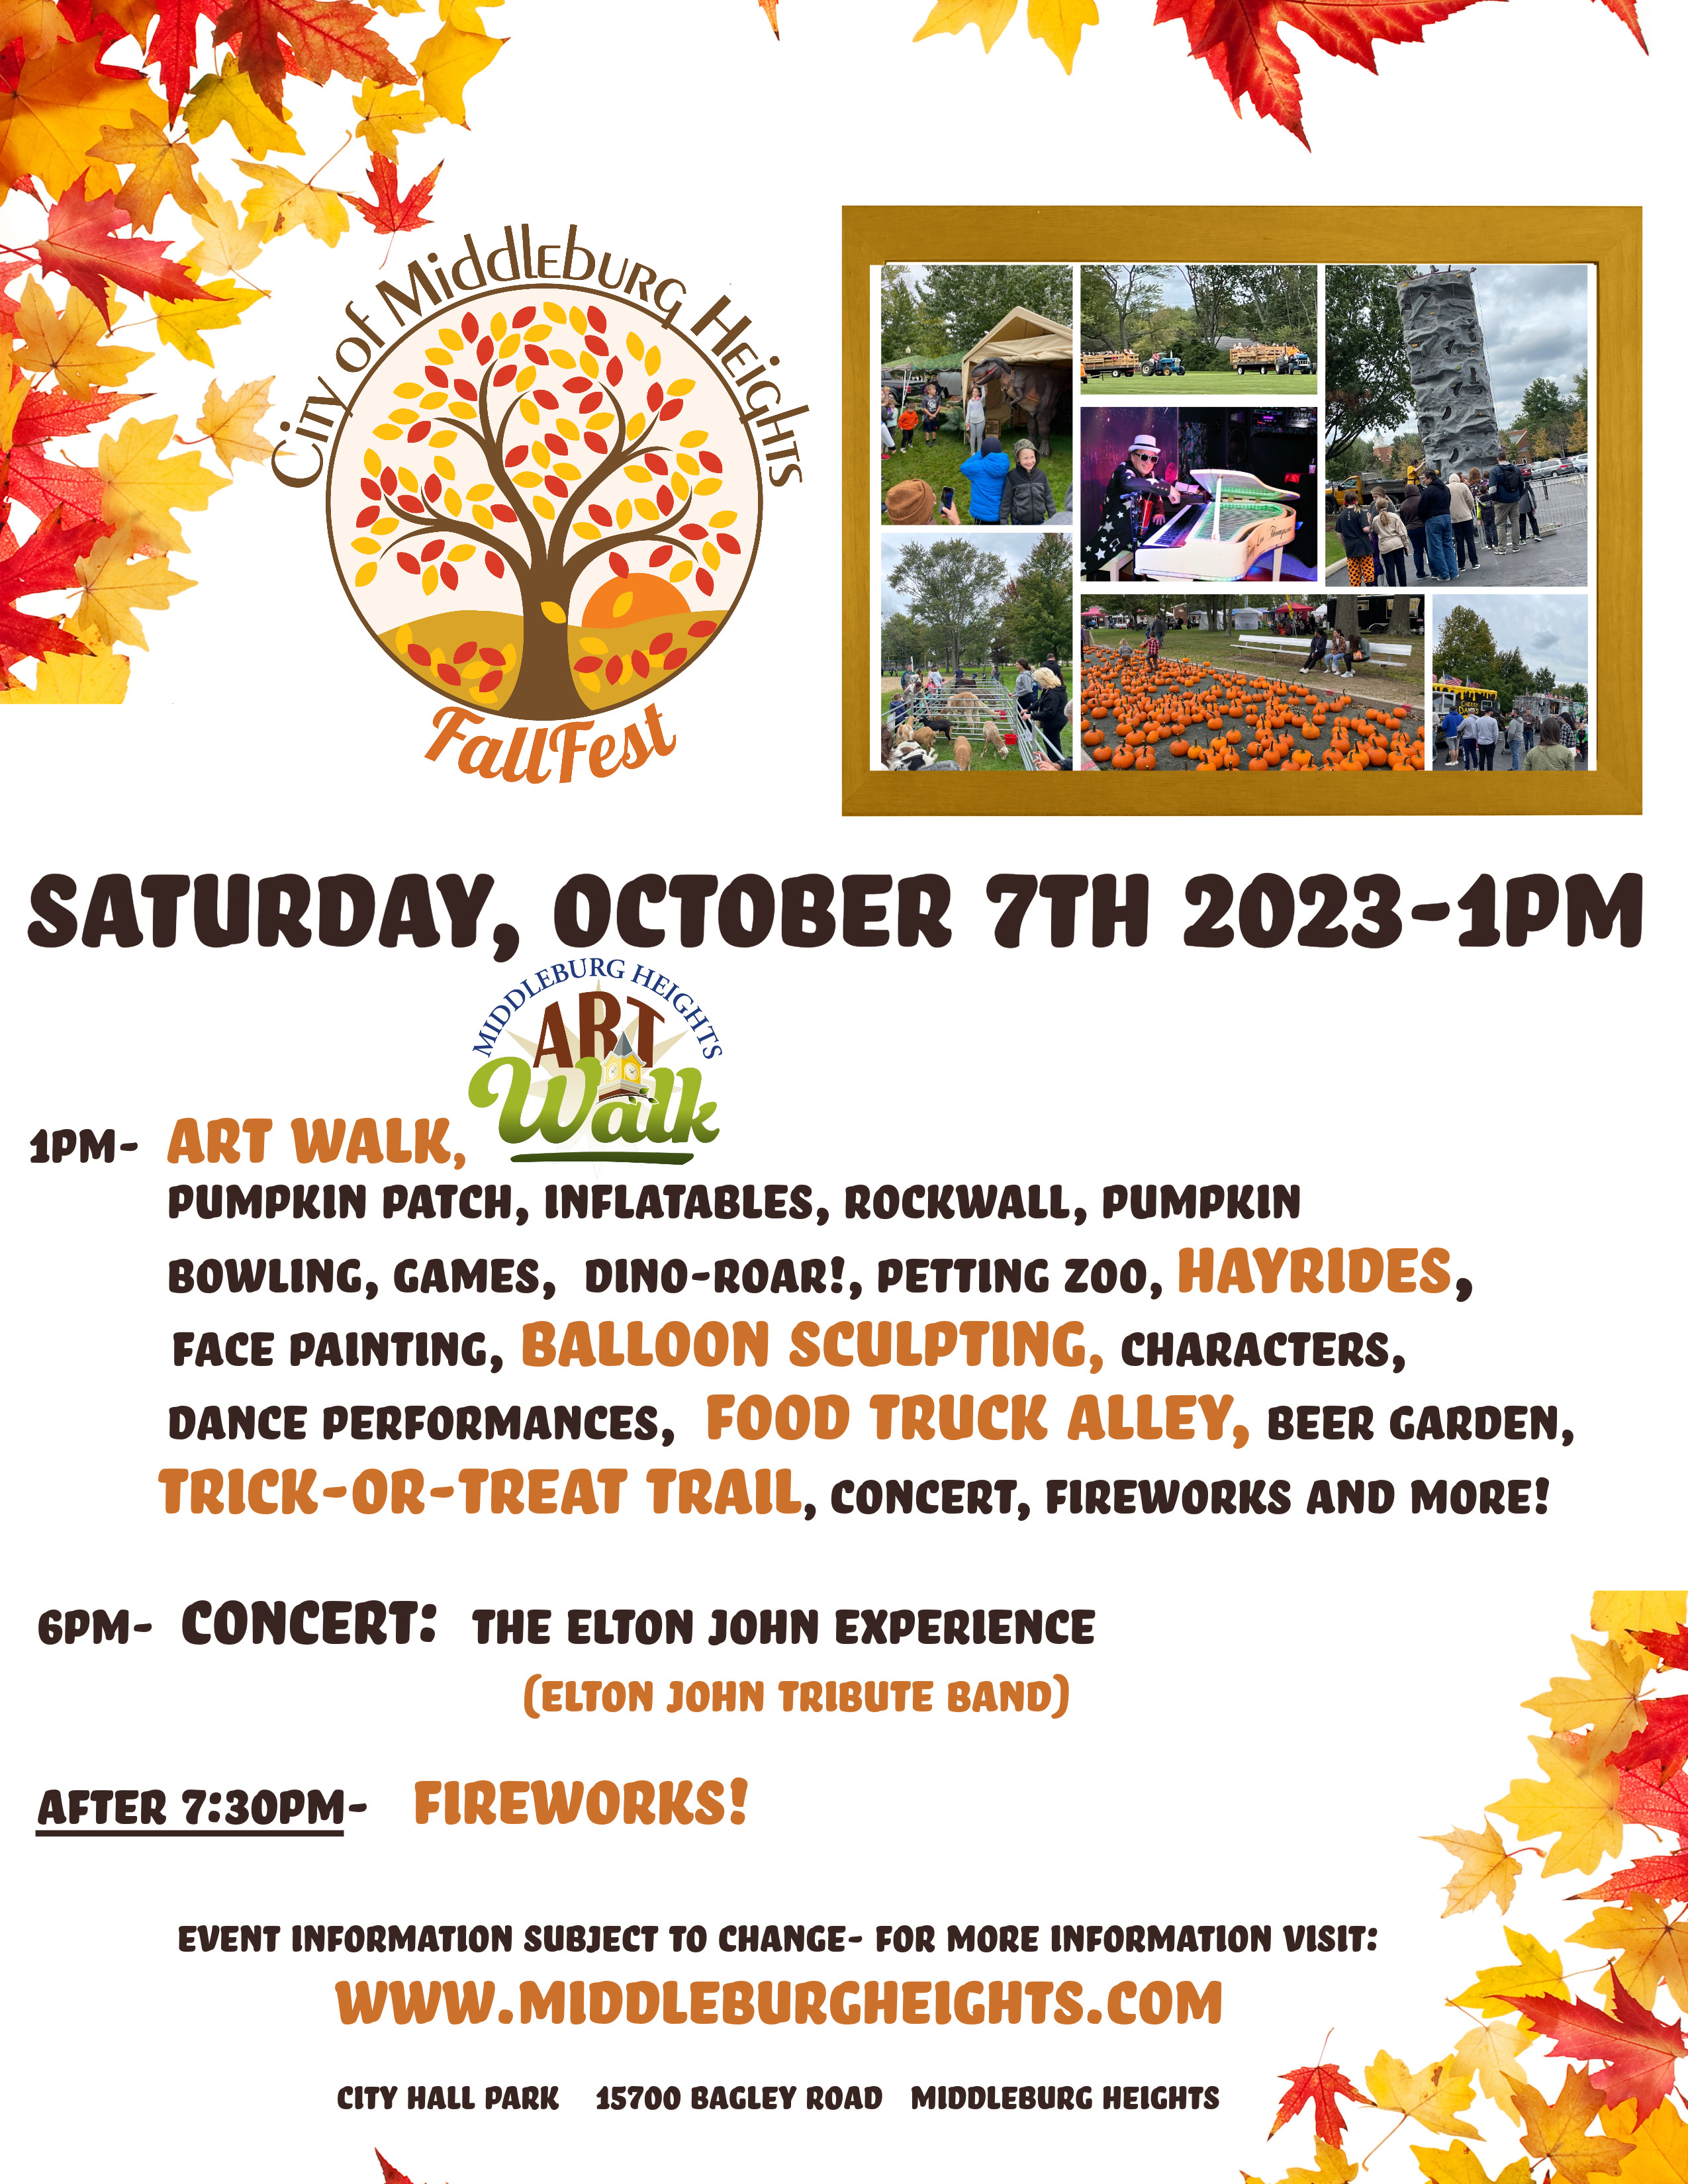 Middleburg Heights Chamber of Commerce October 7th 2023 Fall Fest